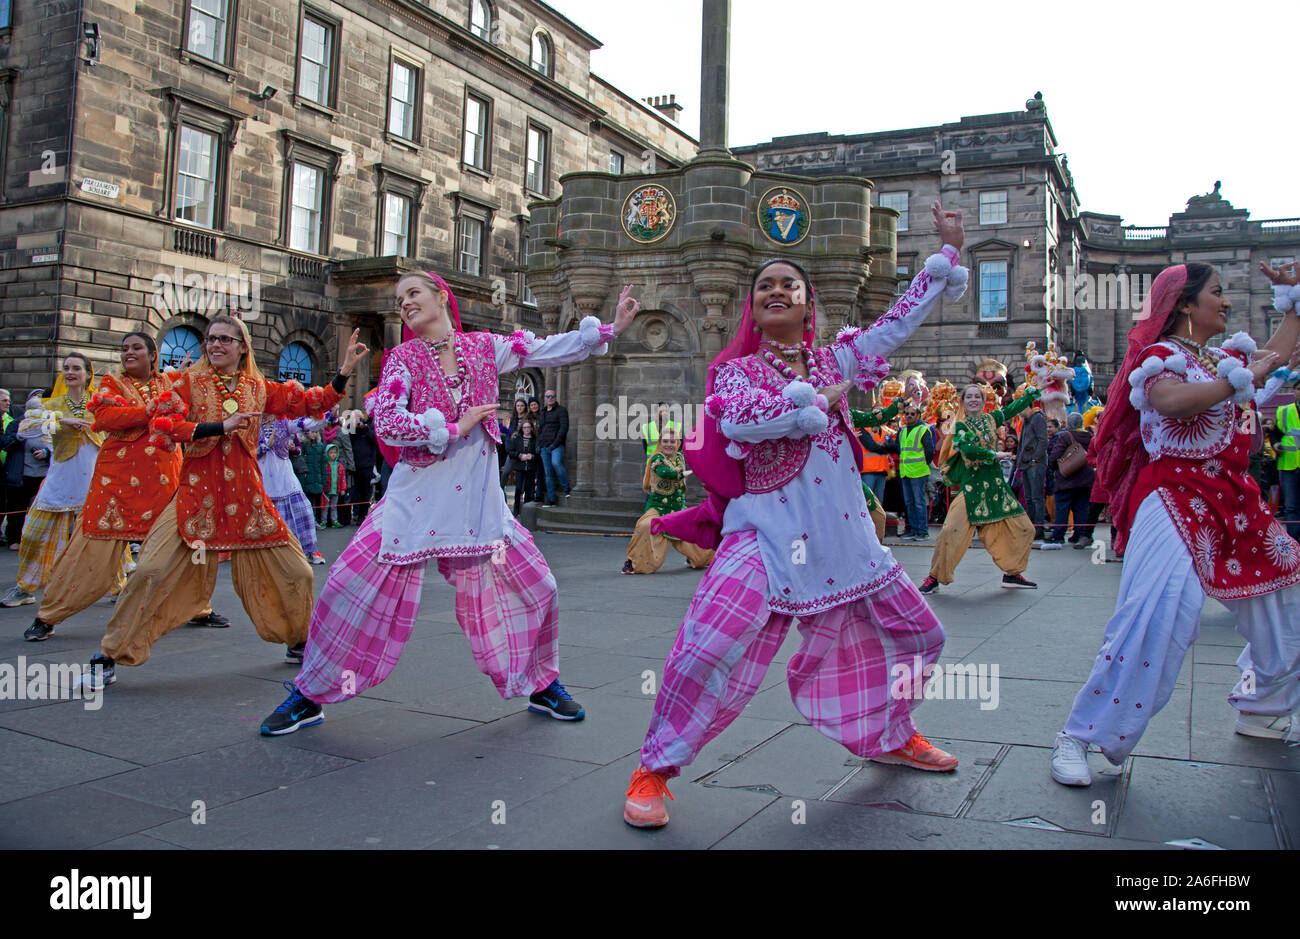 Edinburgh, Scotland, UK. 26th October 2019. The Diwali Parade marches through the city streets culminating in a celebration of theatre, dance and music in Princes Street Gardens. Diwali will light up the city with a dazzling parade and festival of lights dance and music, in Princes Street Gardens West, The Festival of Diwali is celebrated by Hindus, Jains, Sikhs and Buddhists around the world, each religion marking different historical events and legends, however all represent the victory of light over darkness, good over evil and hope over despair. Stock Photo